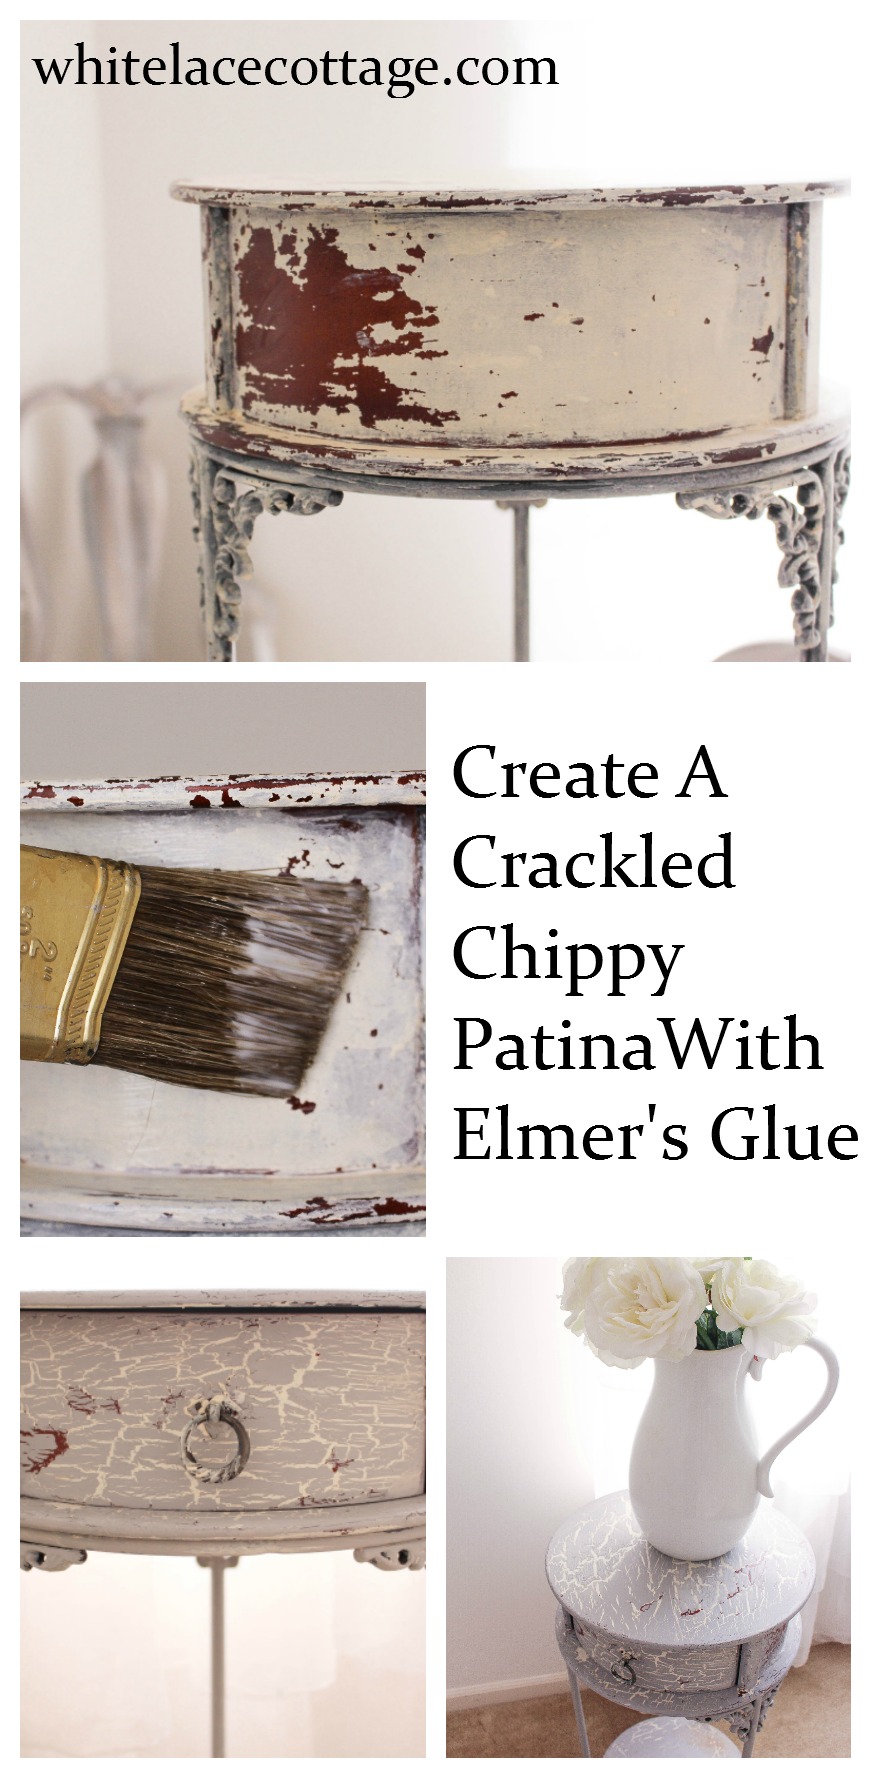 How to Crackle Paint  Crackle painting, Diy painting, Paint furniture